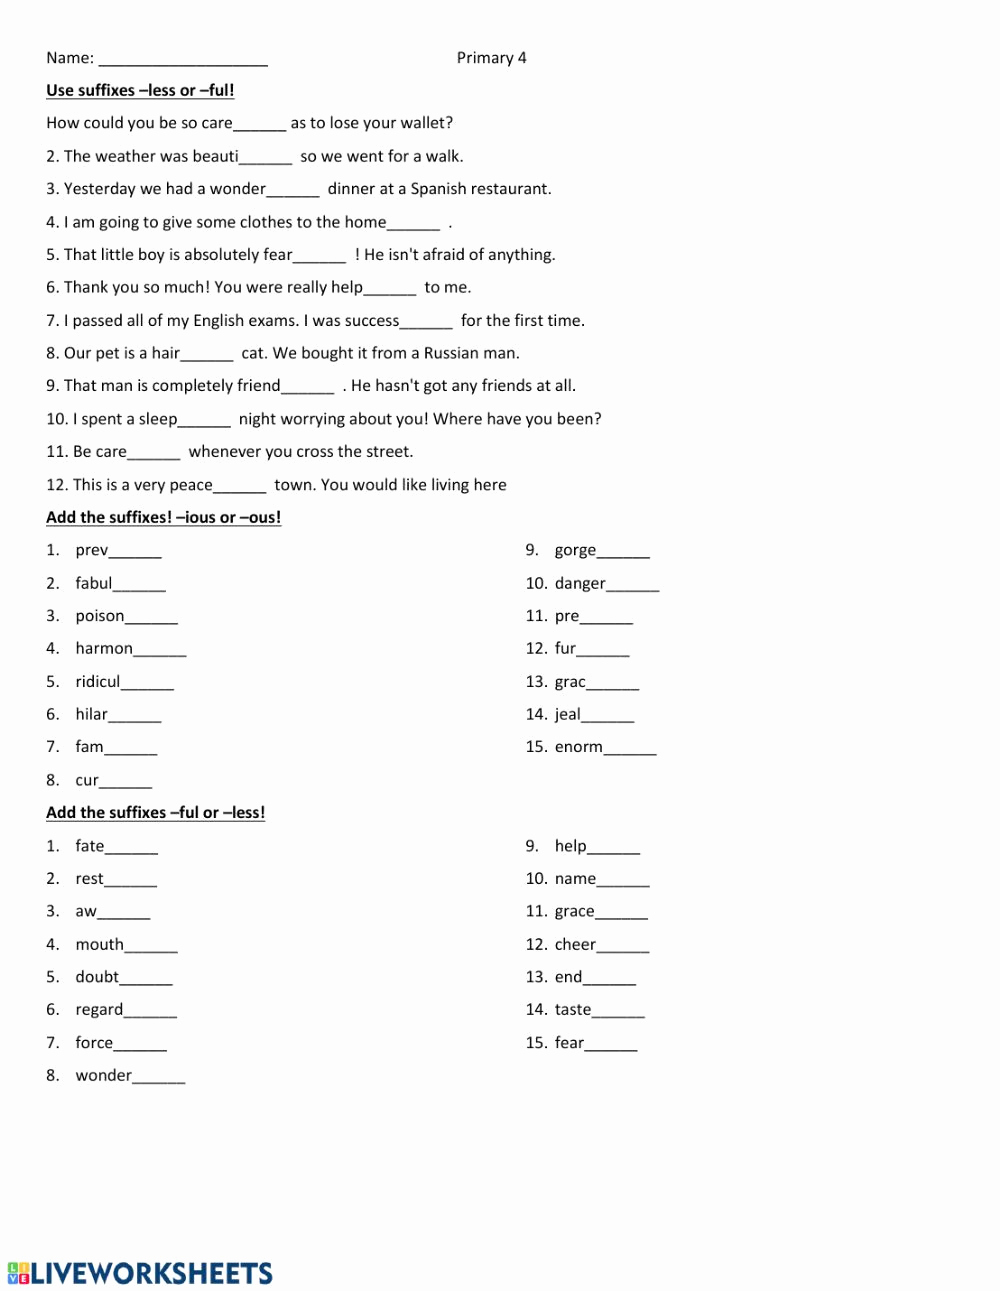 Suffix Ing Worksheets Awesome 30 Suffix Ing Worksheets